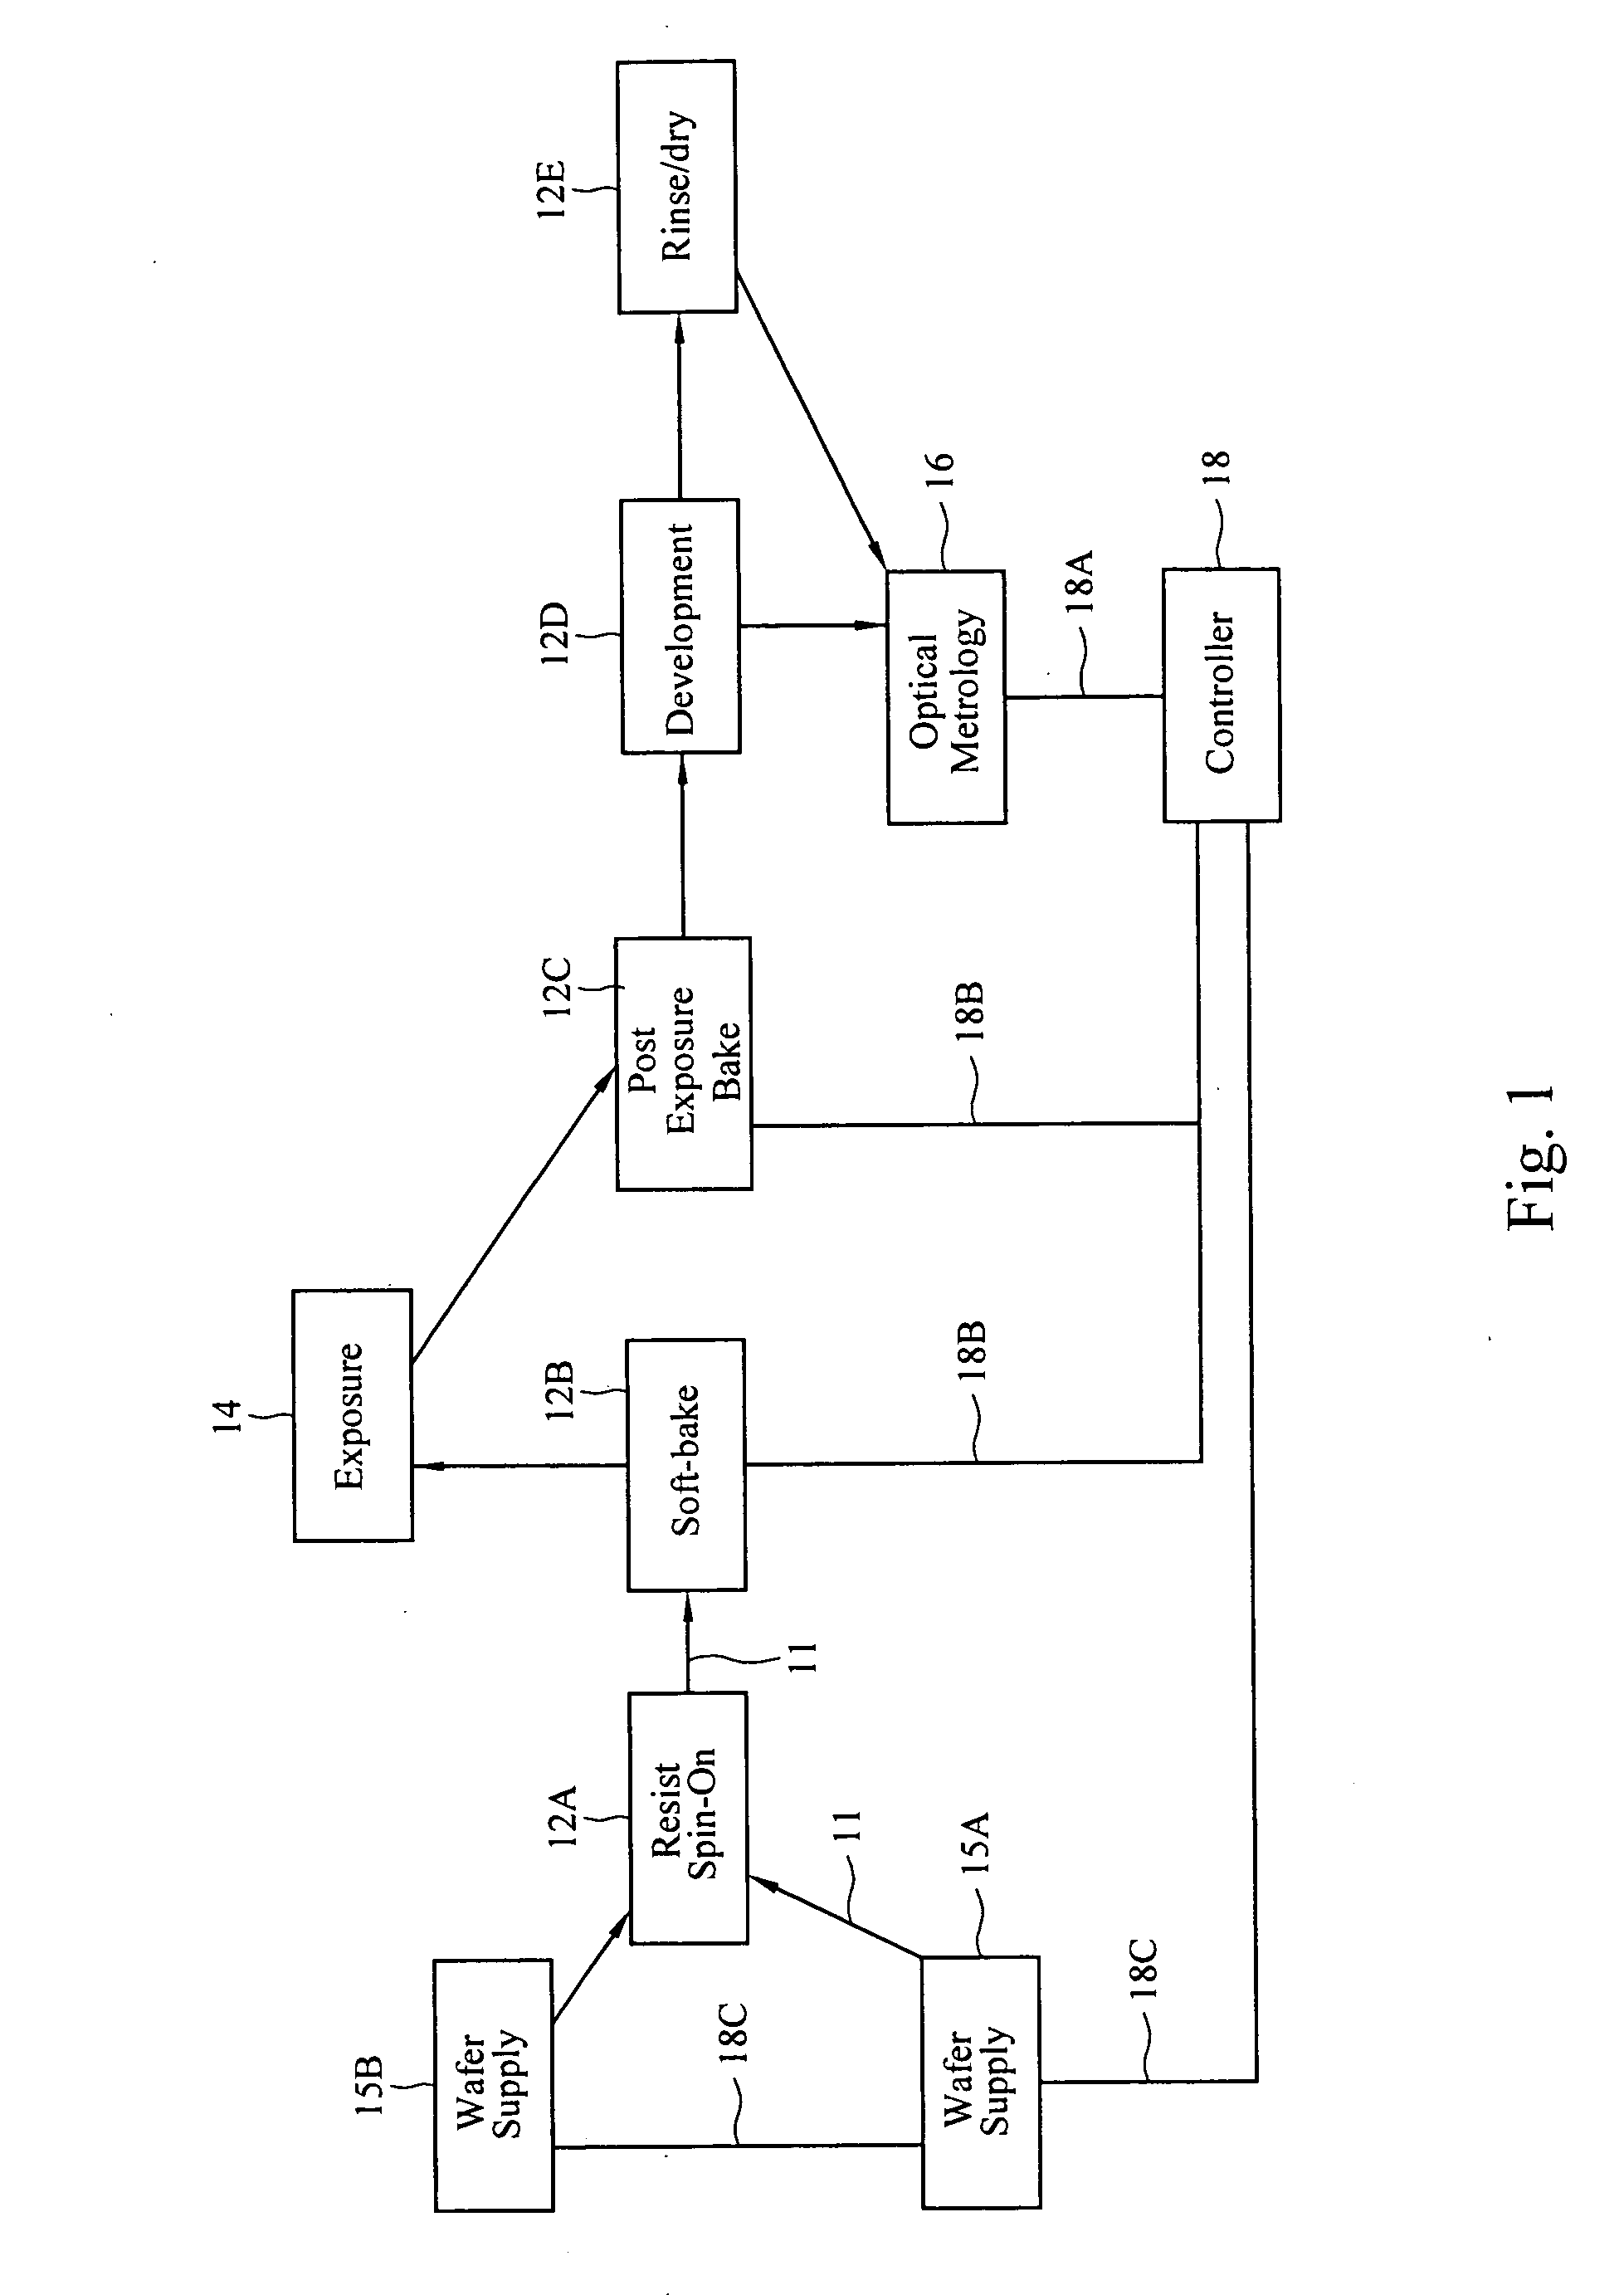 Integrated optical metrology and lithographic process track for dynamic critical dimension control